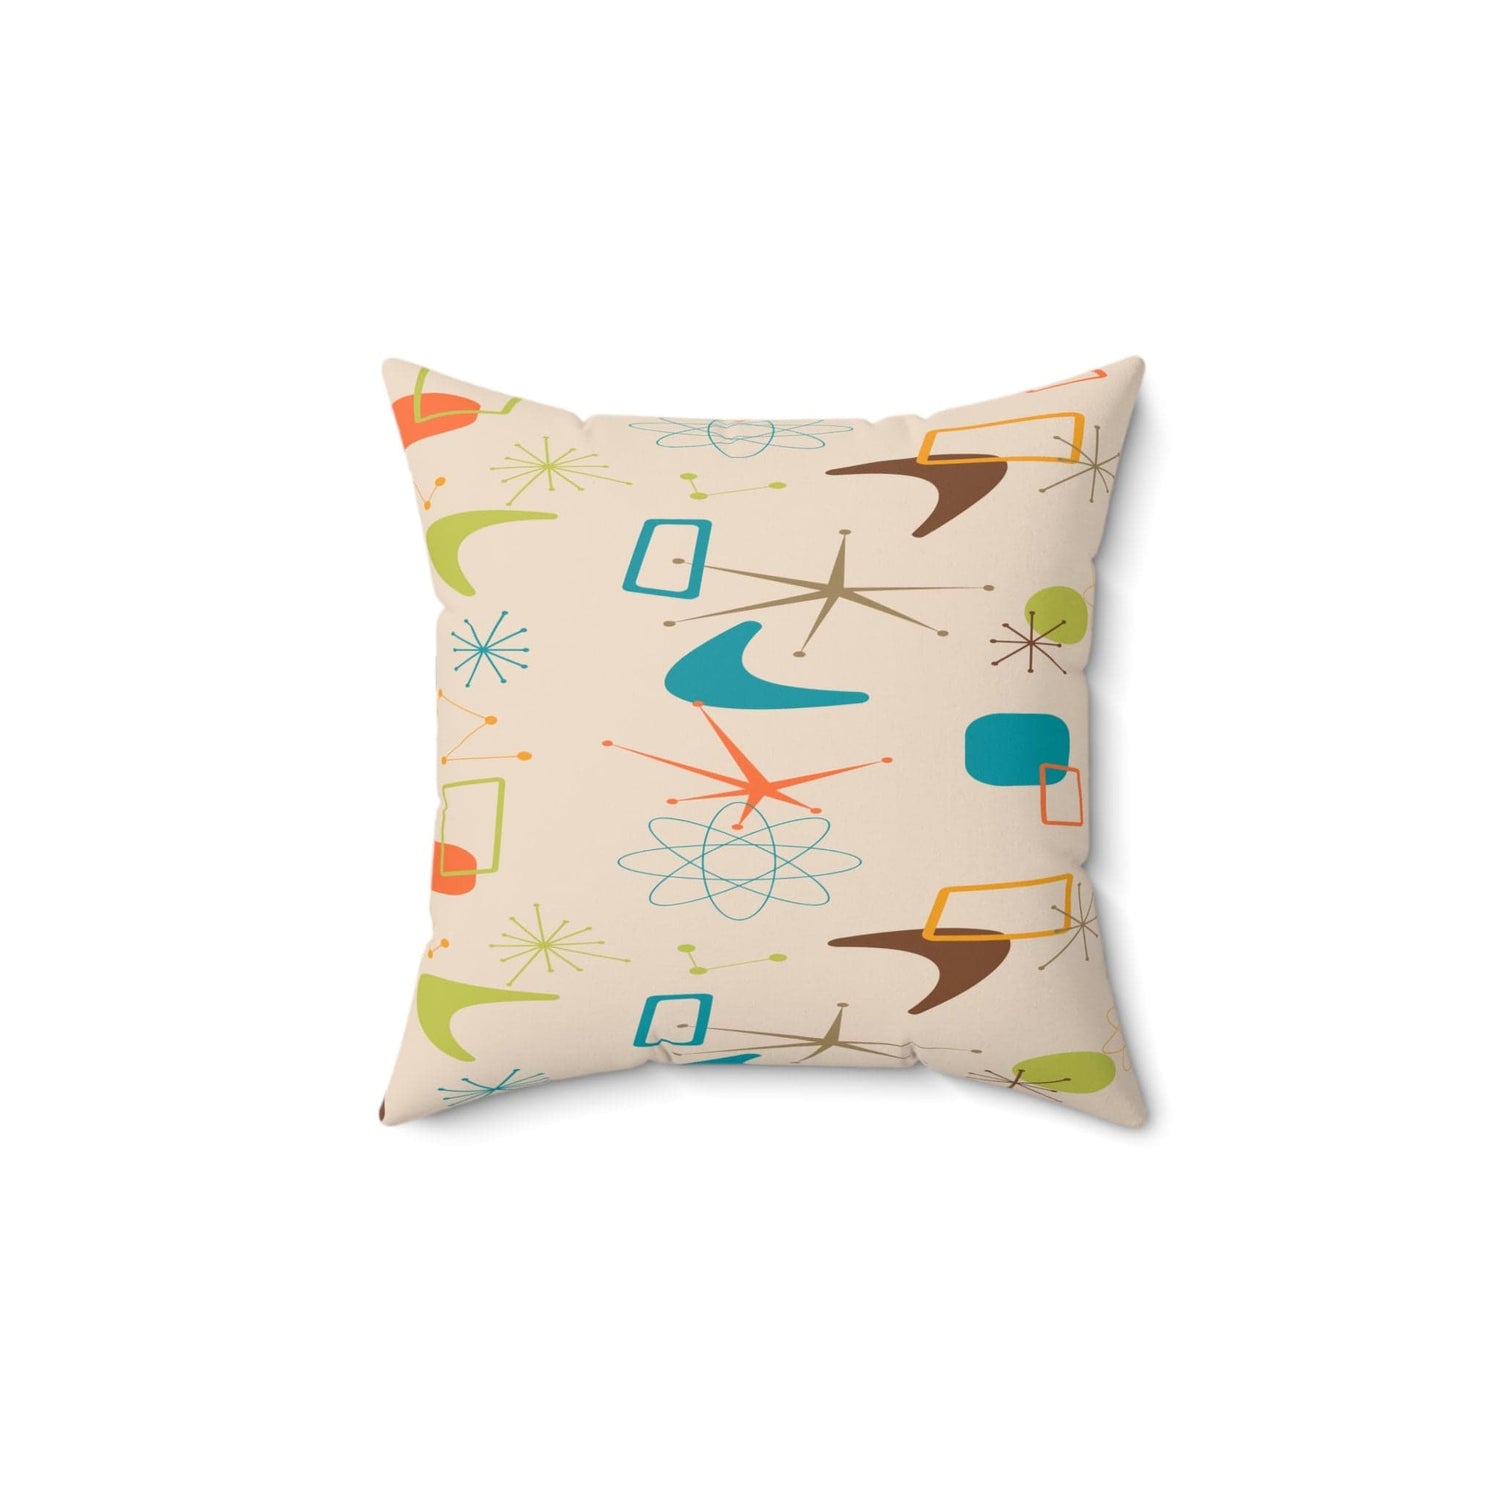 Kate McEnroe New York 50s Mid Century Modern Boomerang Starburst Throw Pillow with Insert, Retro MCM Beige, Orange, Teal, Lime, Living Room, Bedroom Accent PillowThrow Pillows30863447366434392487